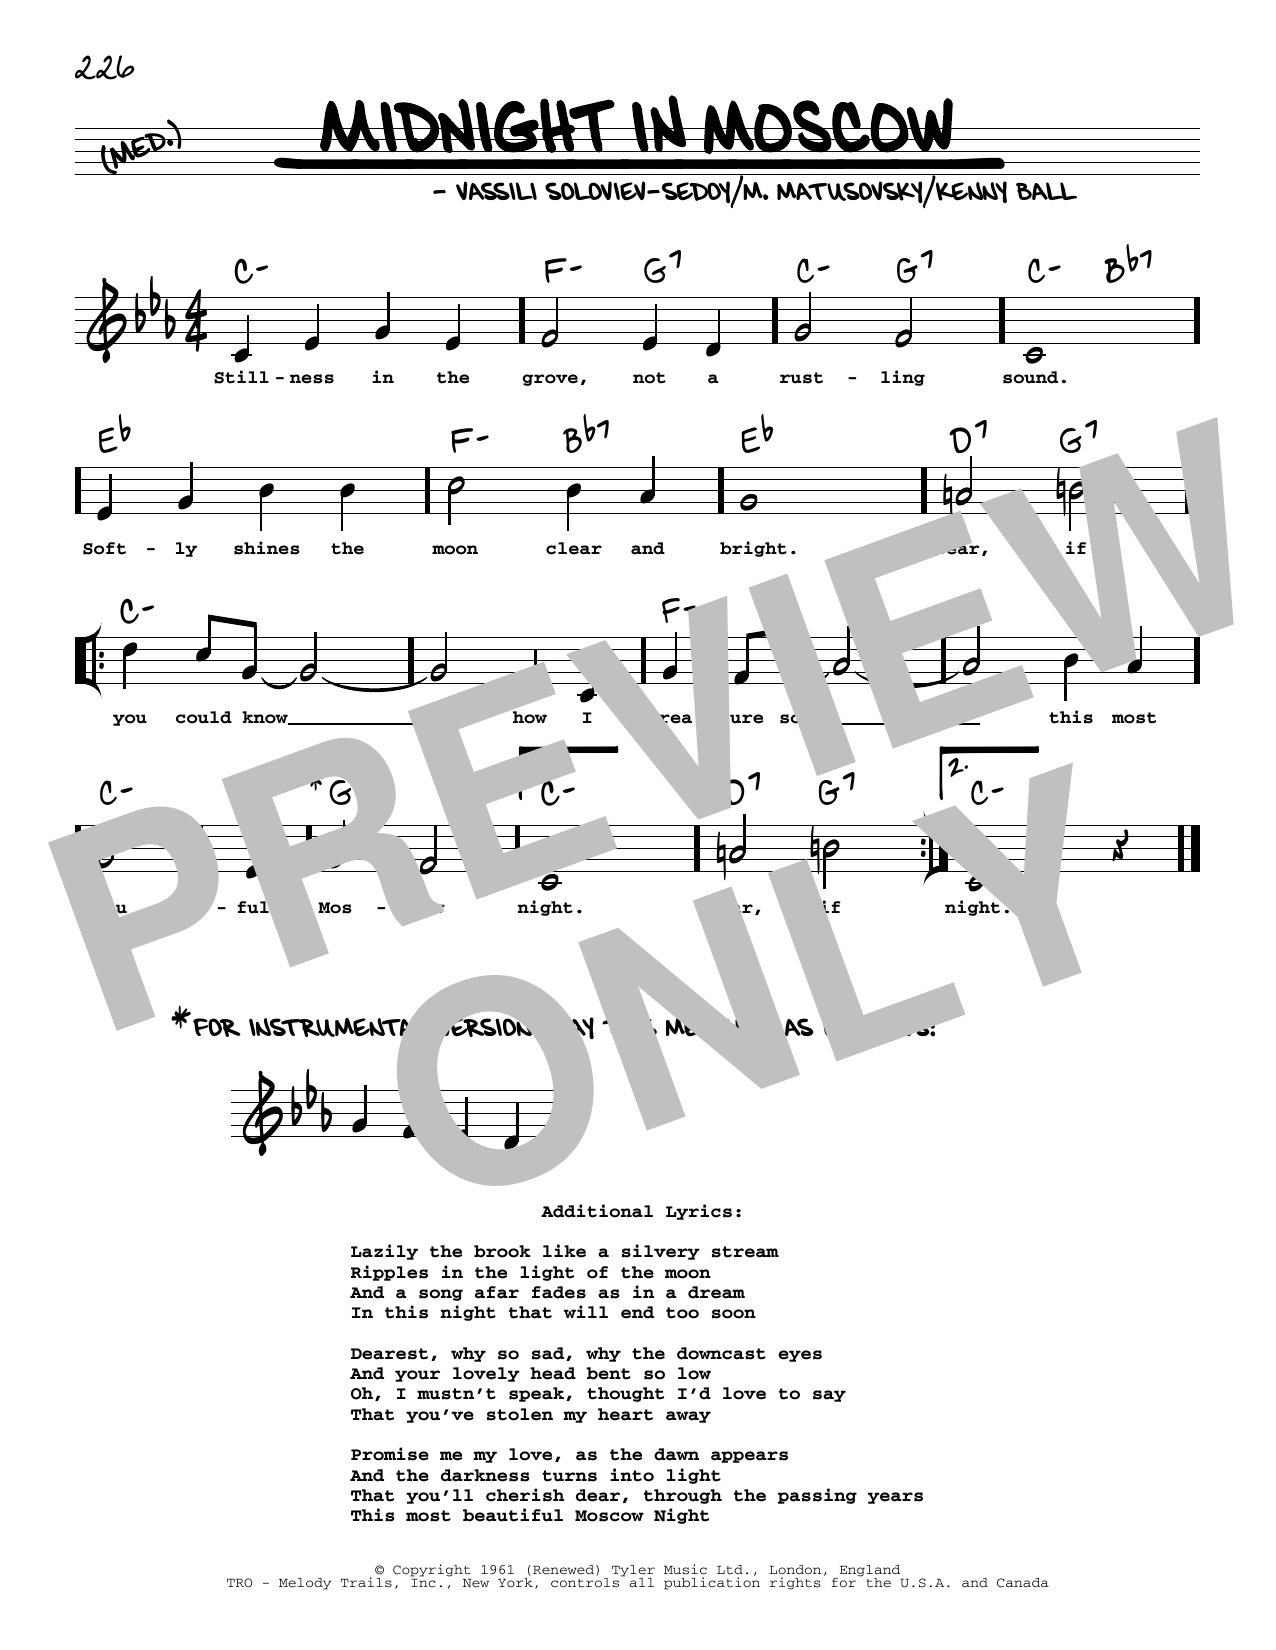 Download Fats Waller The Minor Drag (The Dragster Drag) (arr Sheet Music